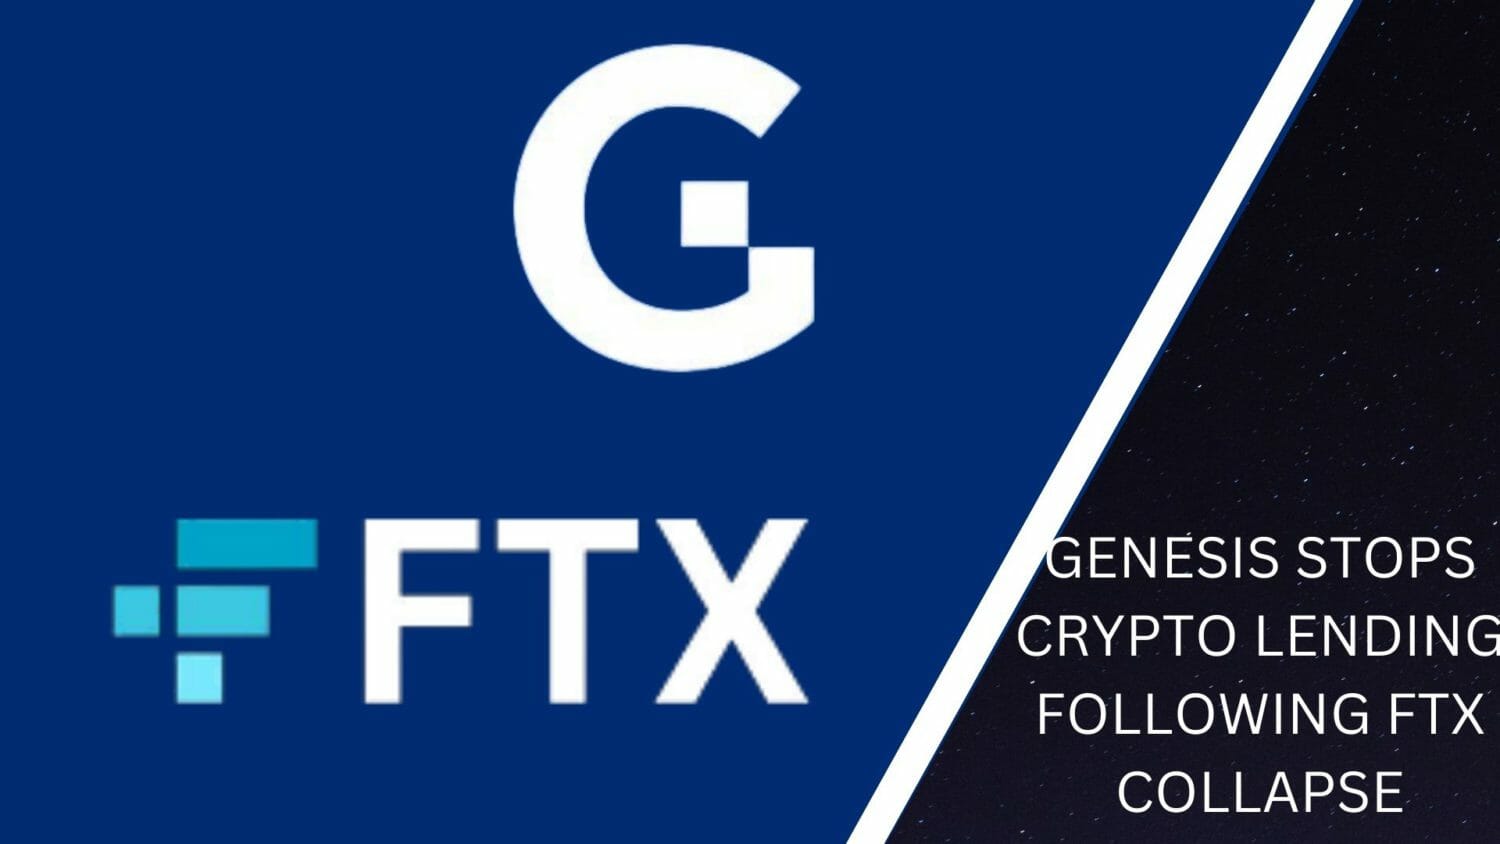 Genesis Stops Crypto Lending Following Ftx Collapse